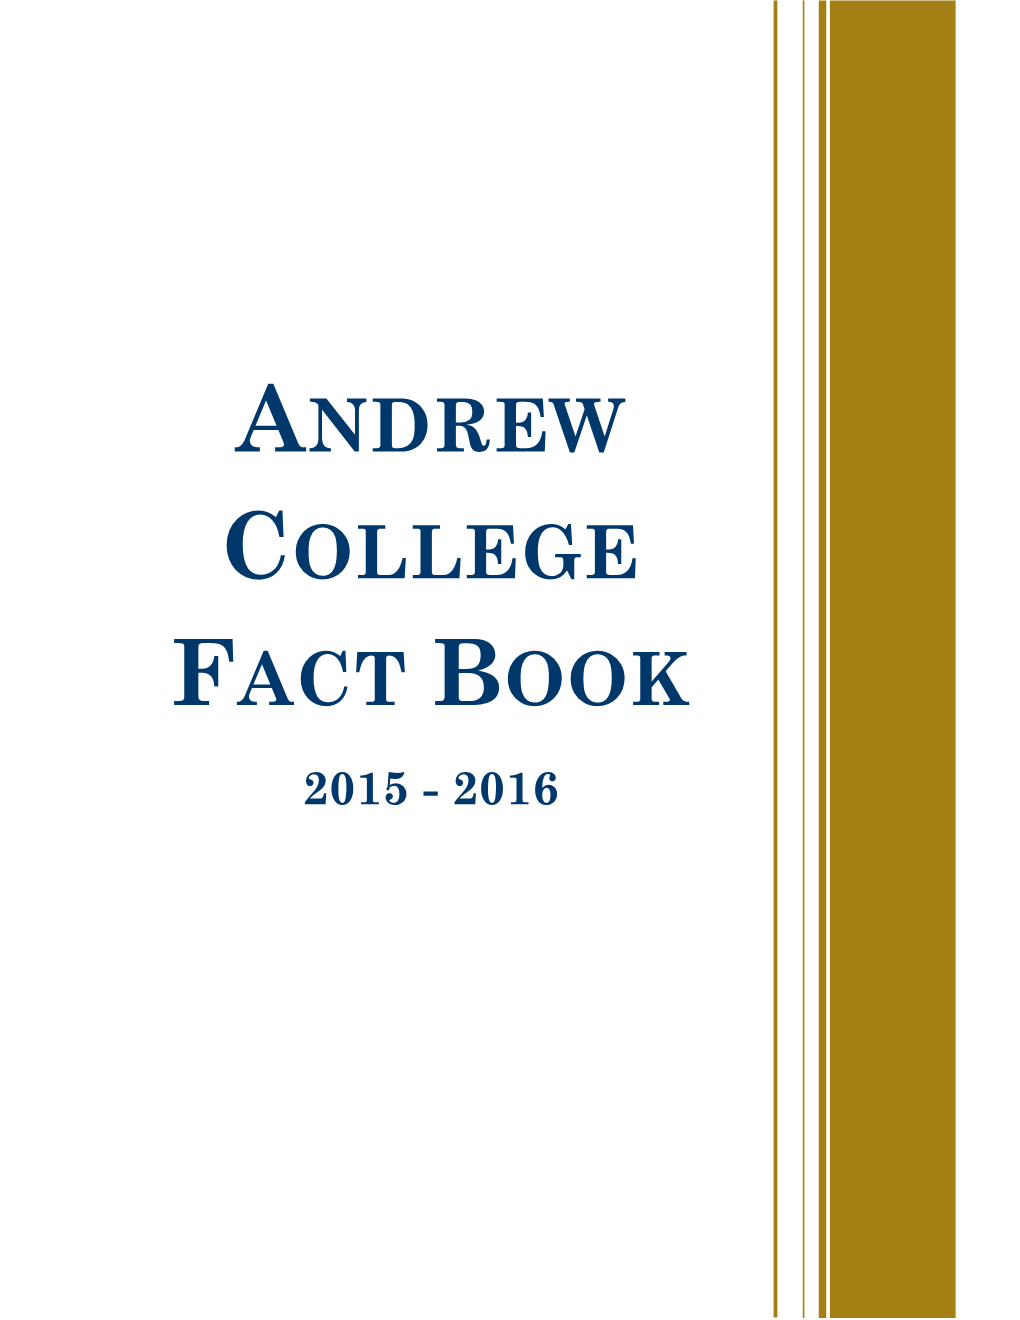 Andrew College Fact Book 2015-2016 Includes Data from the Academic Year 2015-2016 Which Includes Fall 2015, Spring 2016, and Summer 2016 Data